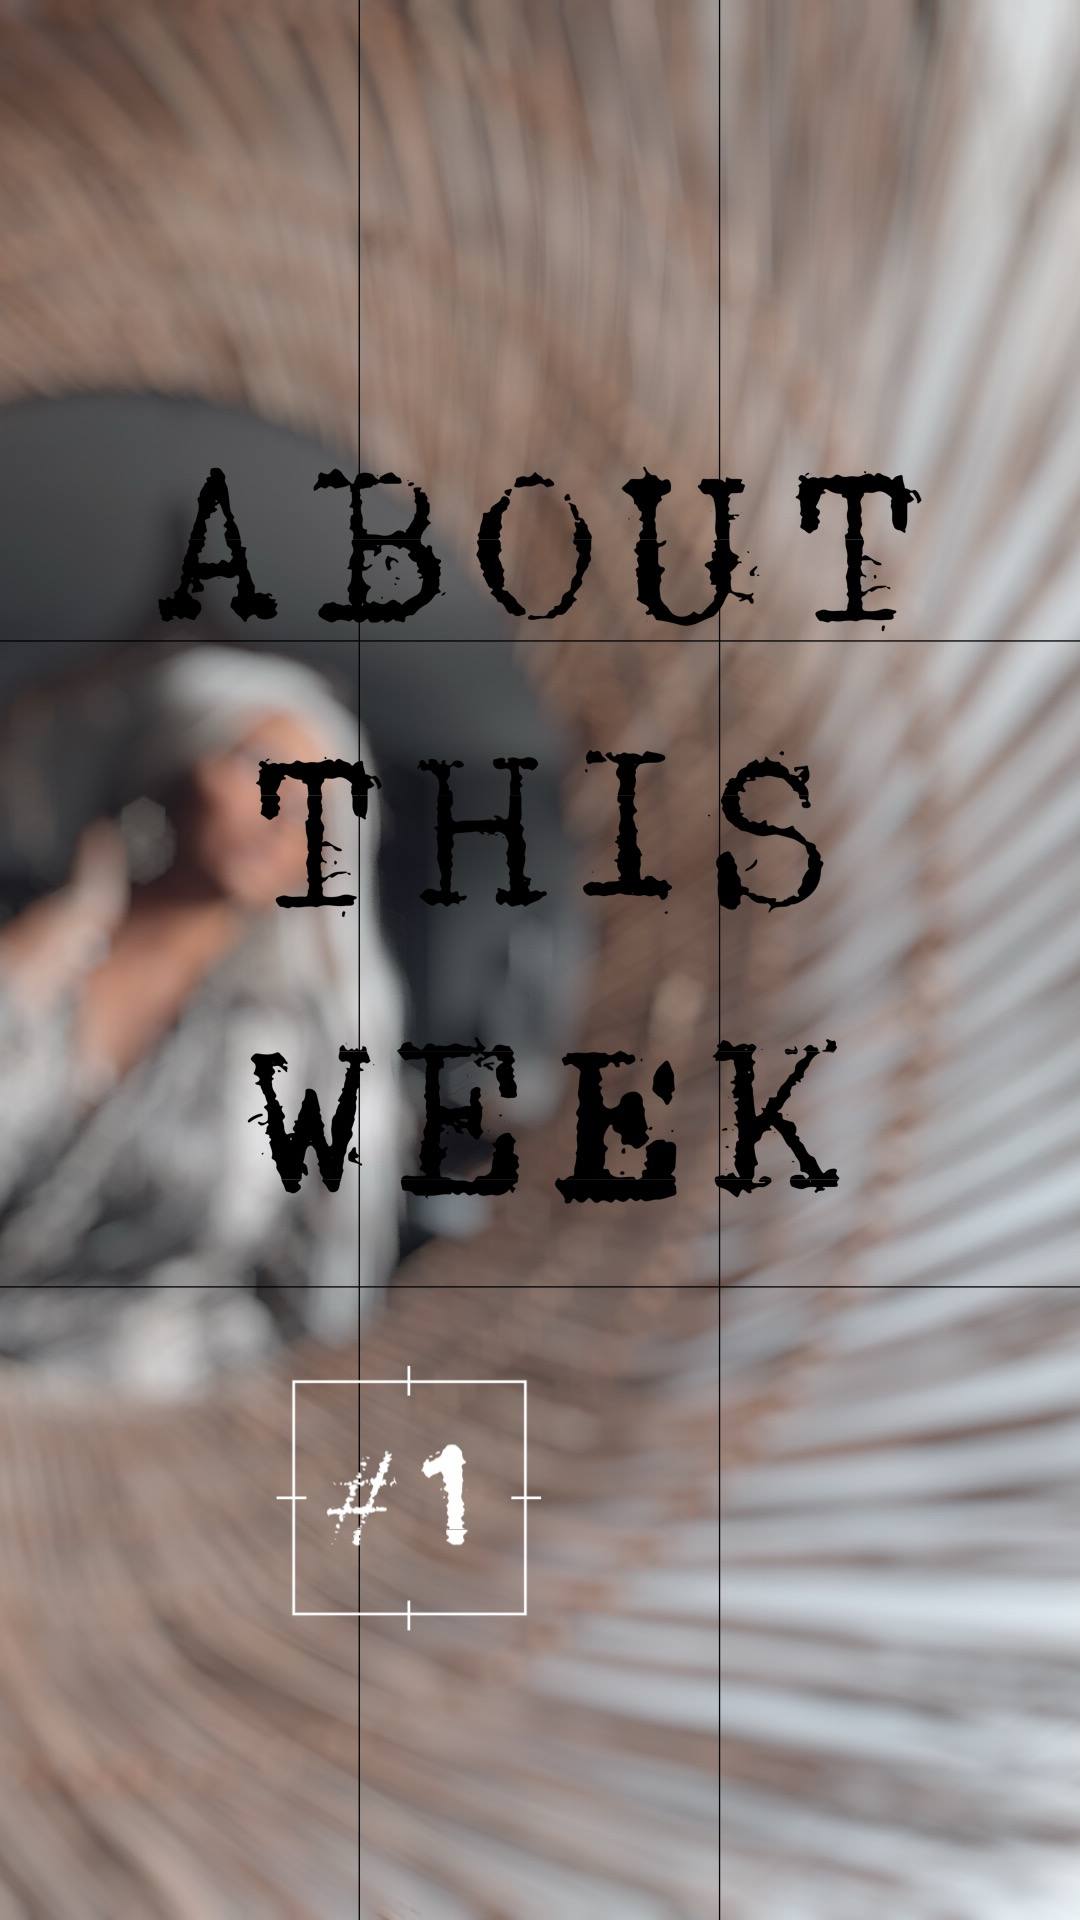 About this week #1